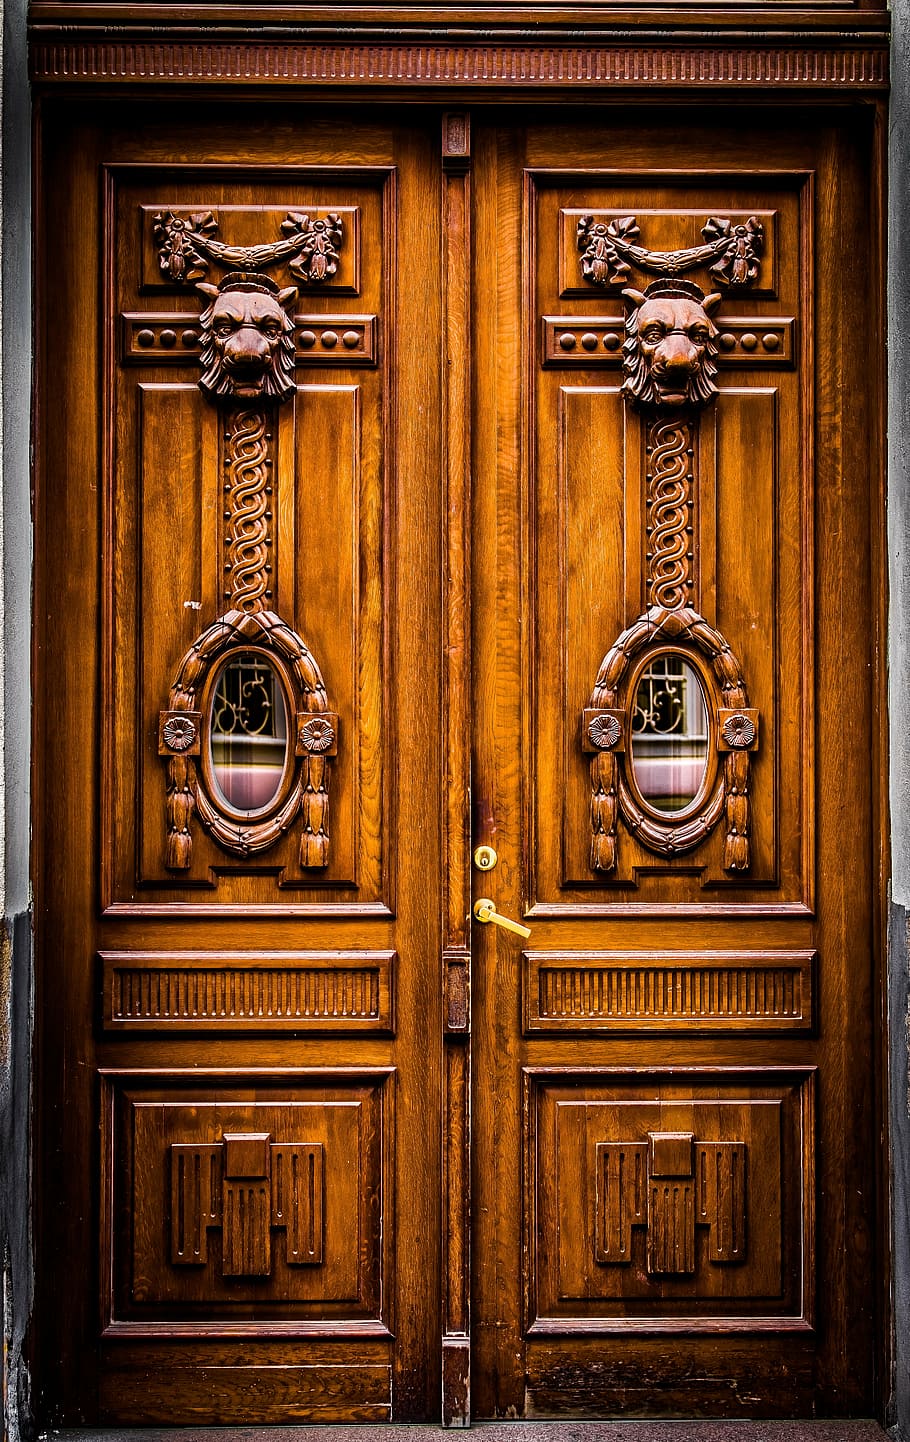 brown, wooden, side-by-side, door, architecture, design, sculpture, art, wood - material, closed